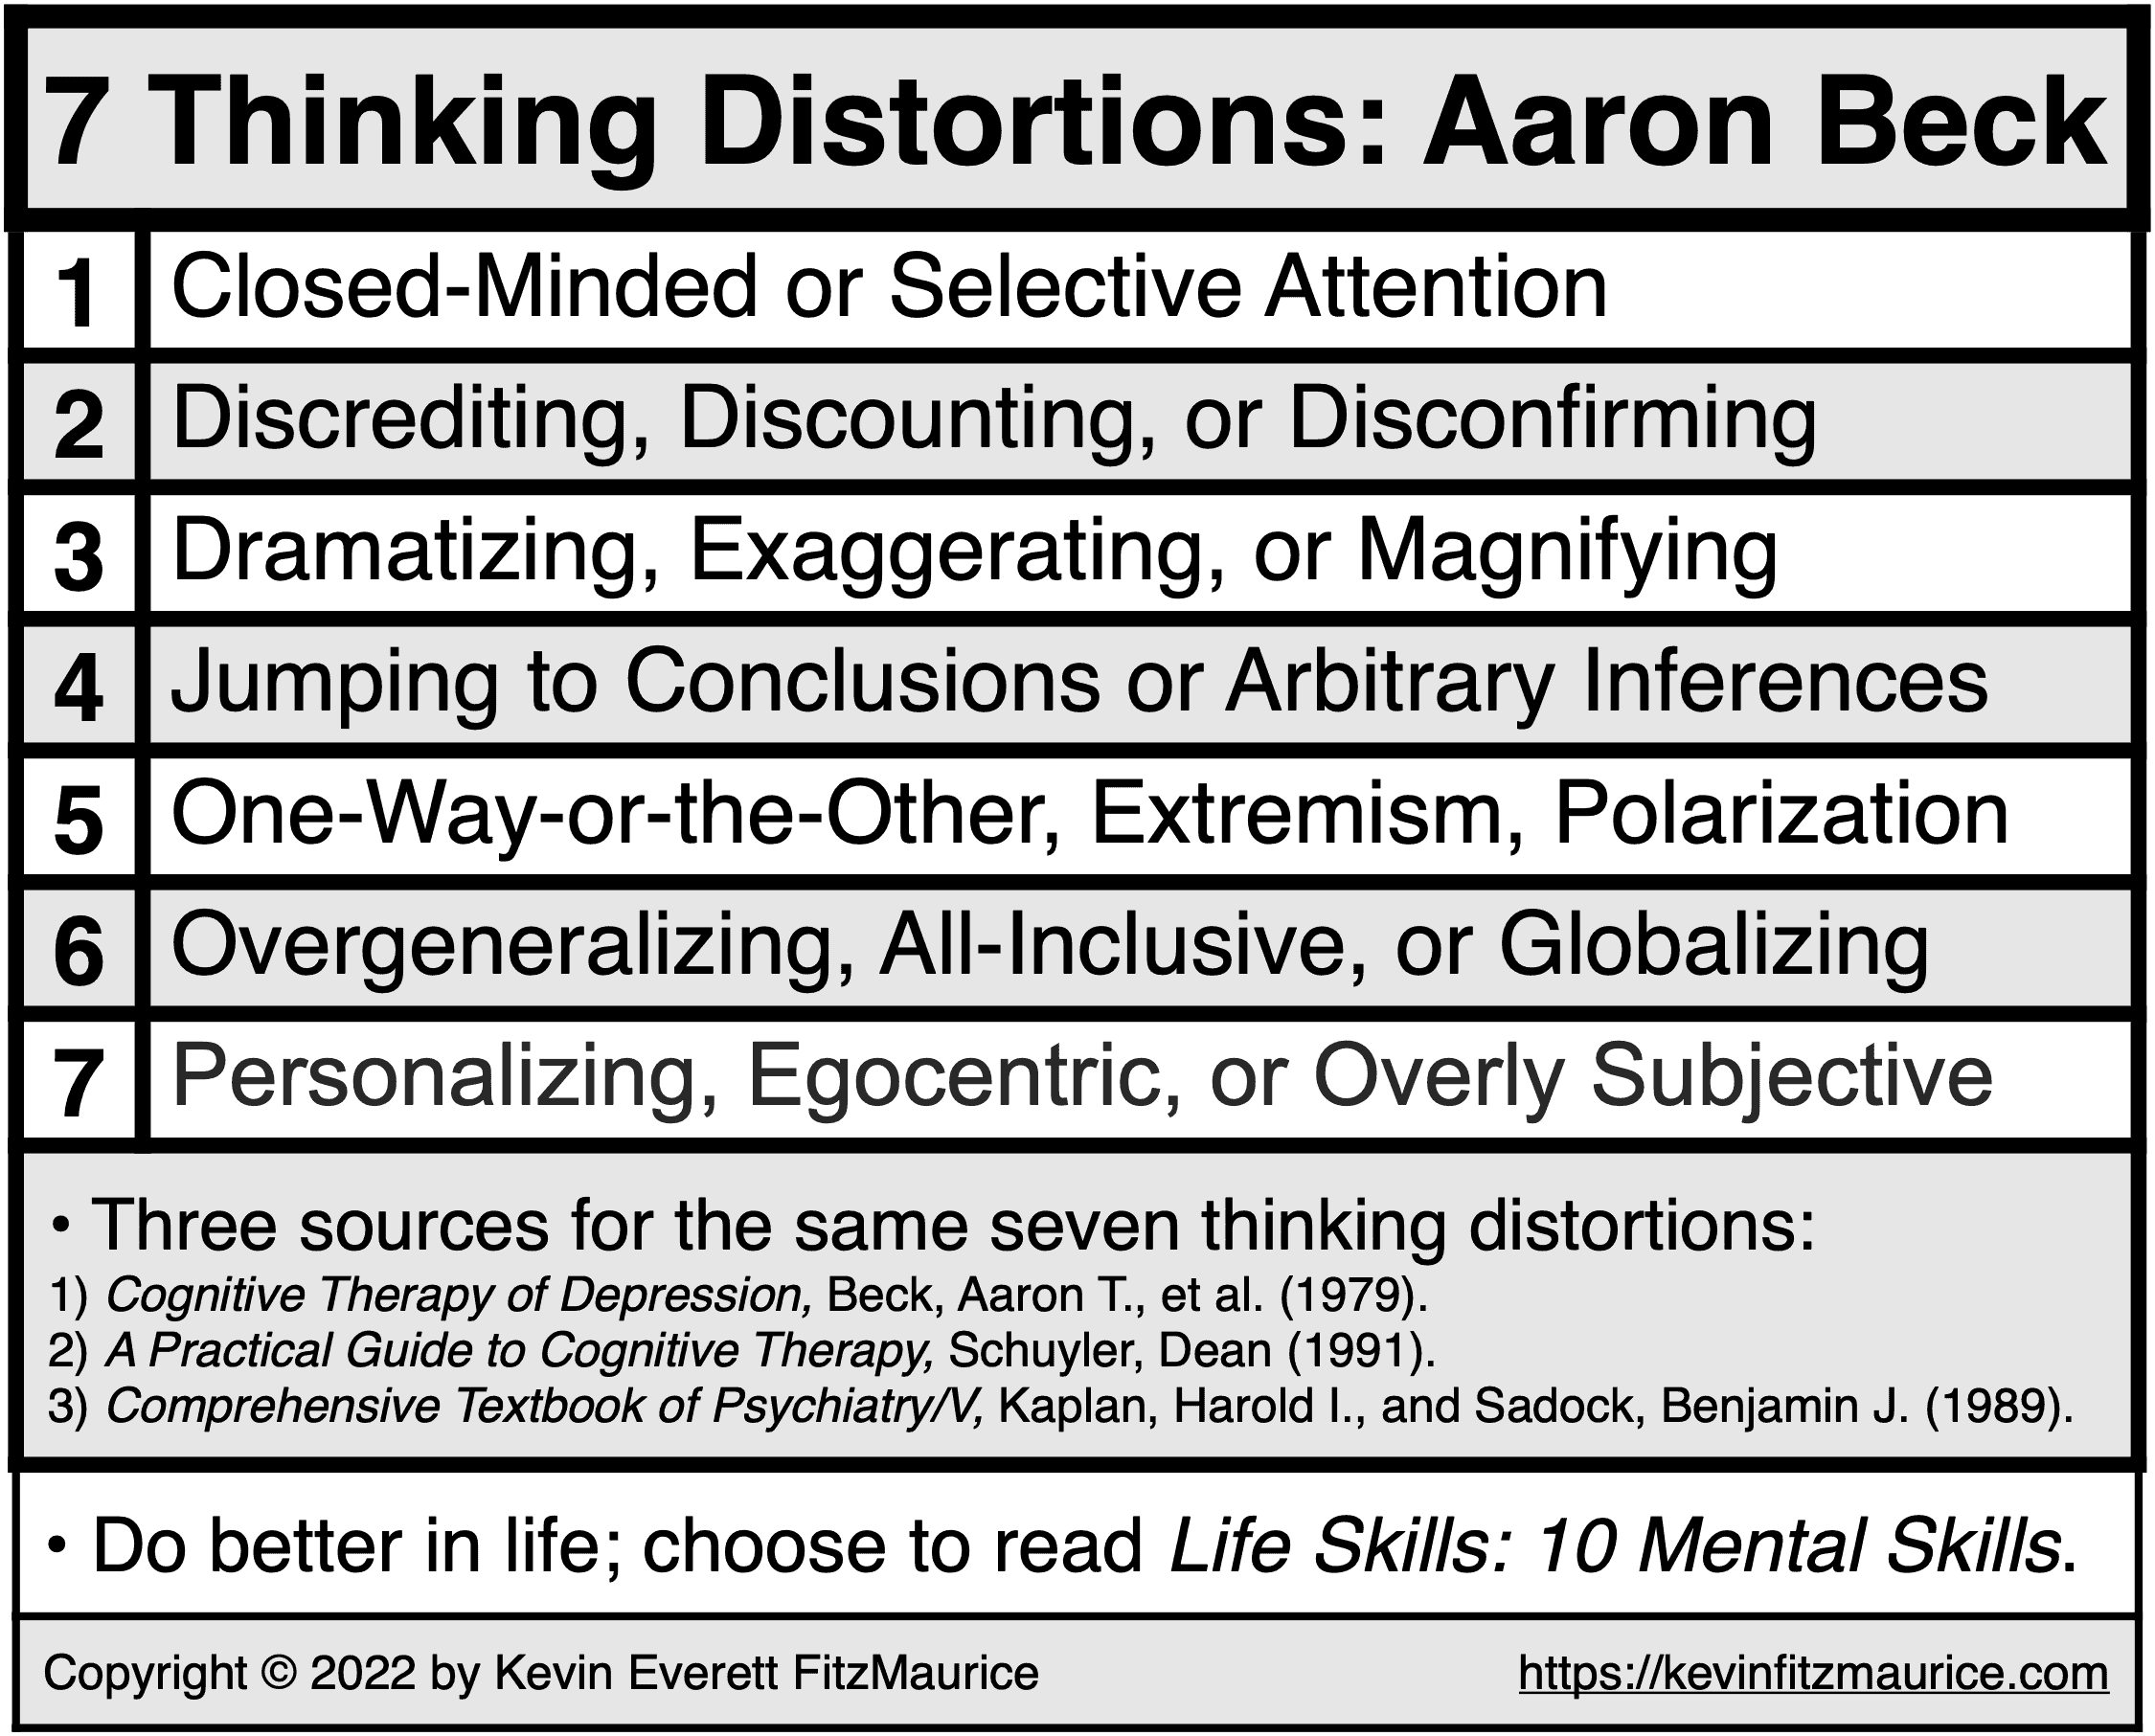 7 Types of Thinking Distortions